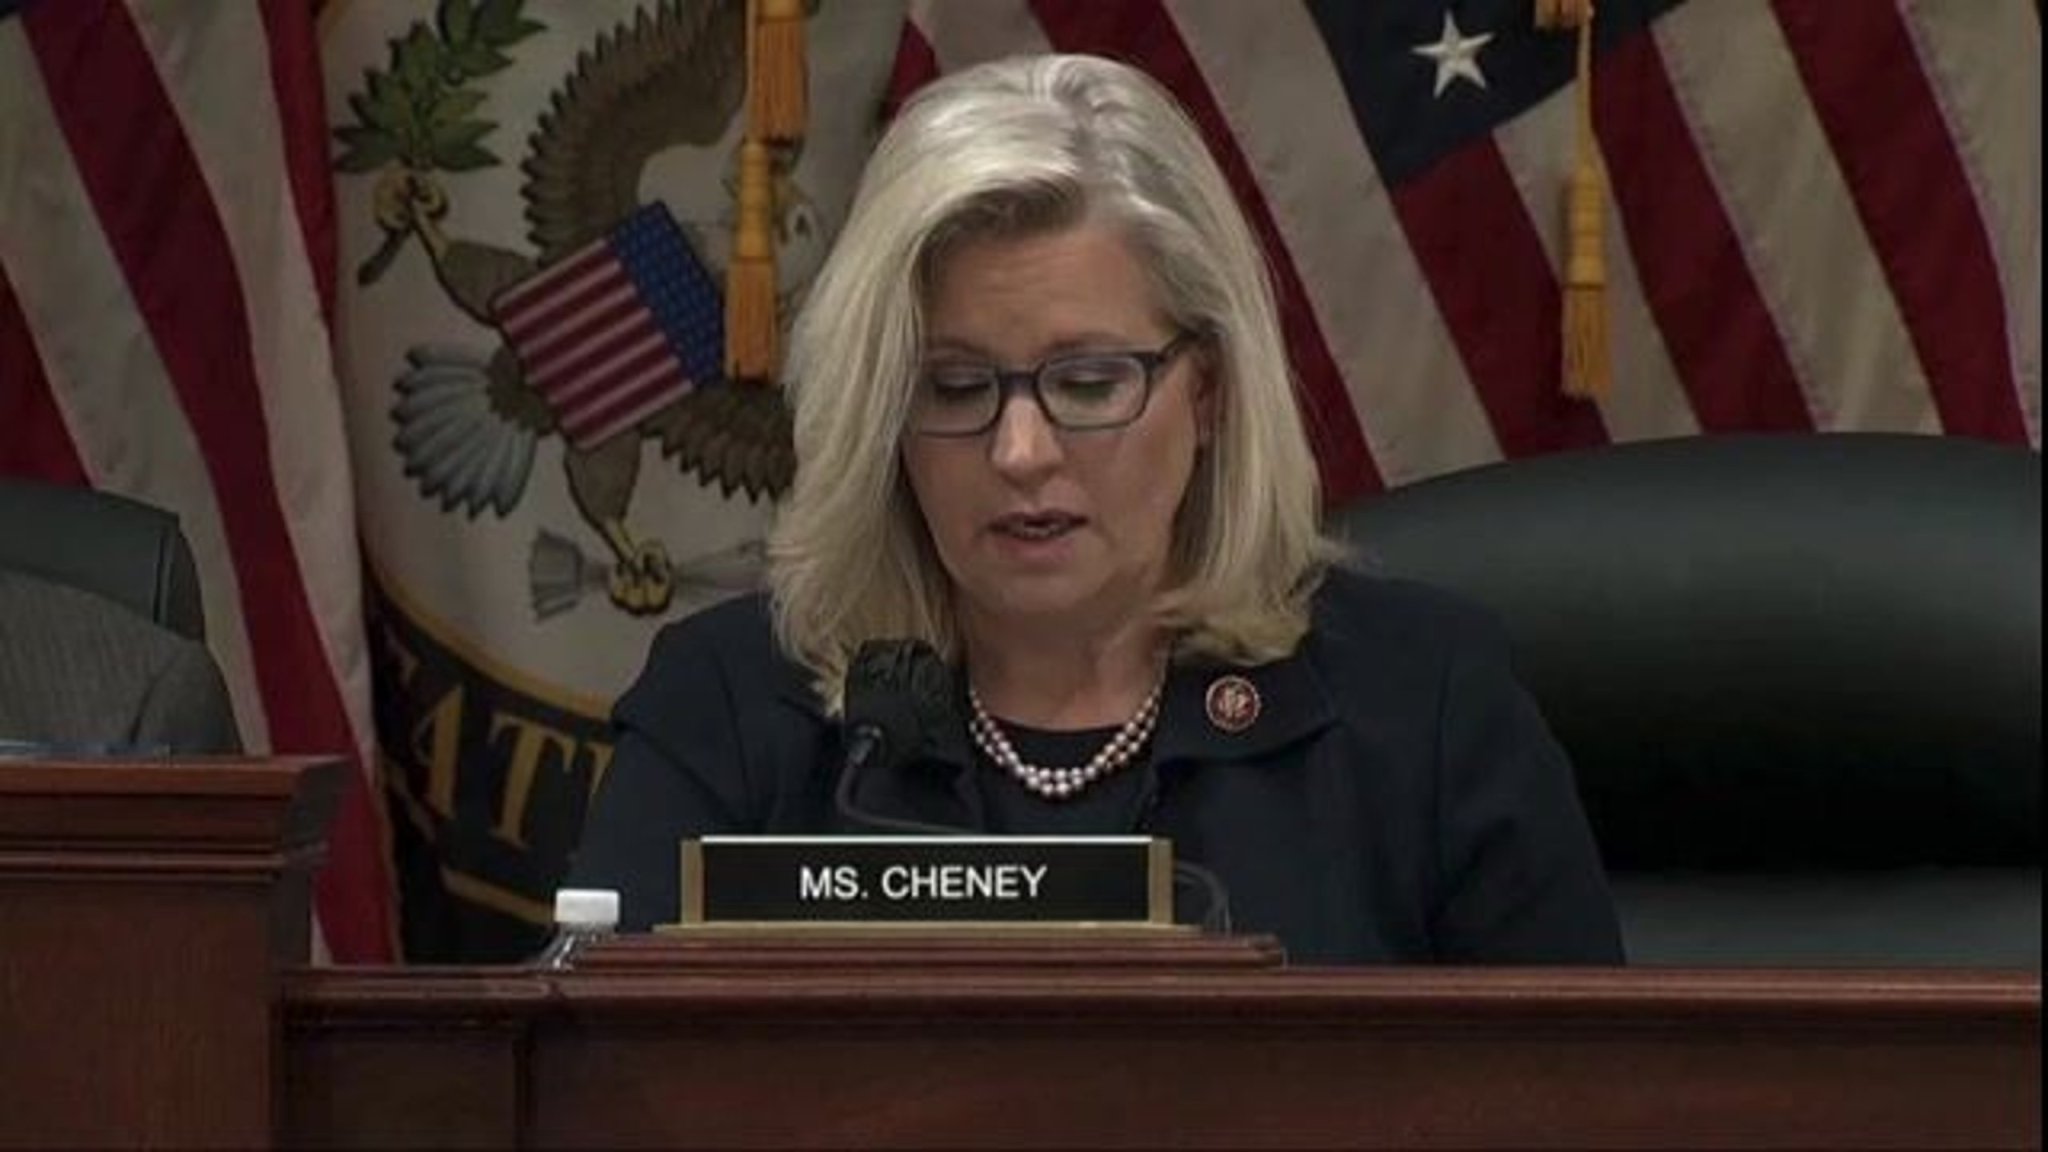 Rep. Cheney says people who chose to enter the enclosed area for Trump's speech were screened and found to have weapons.